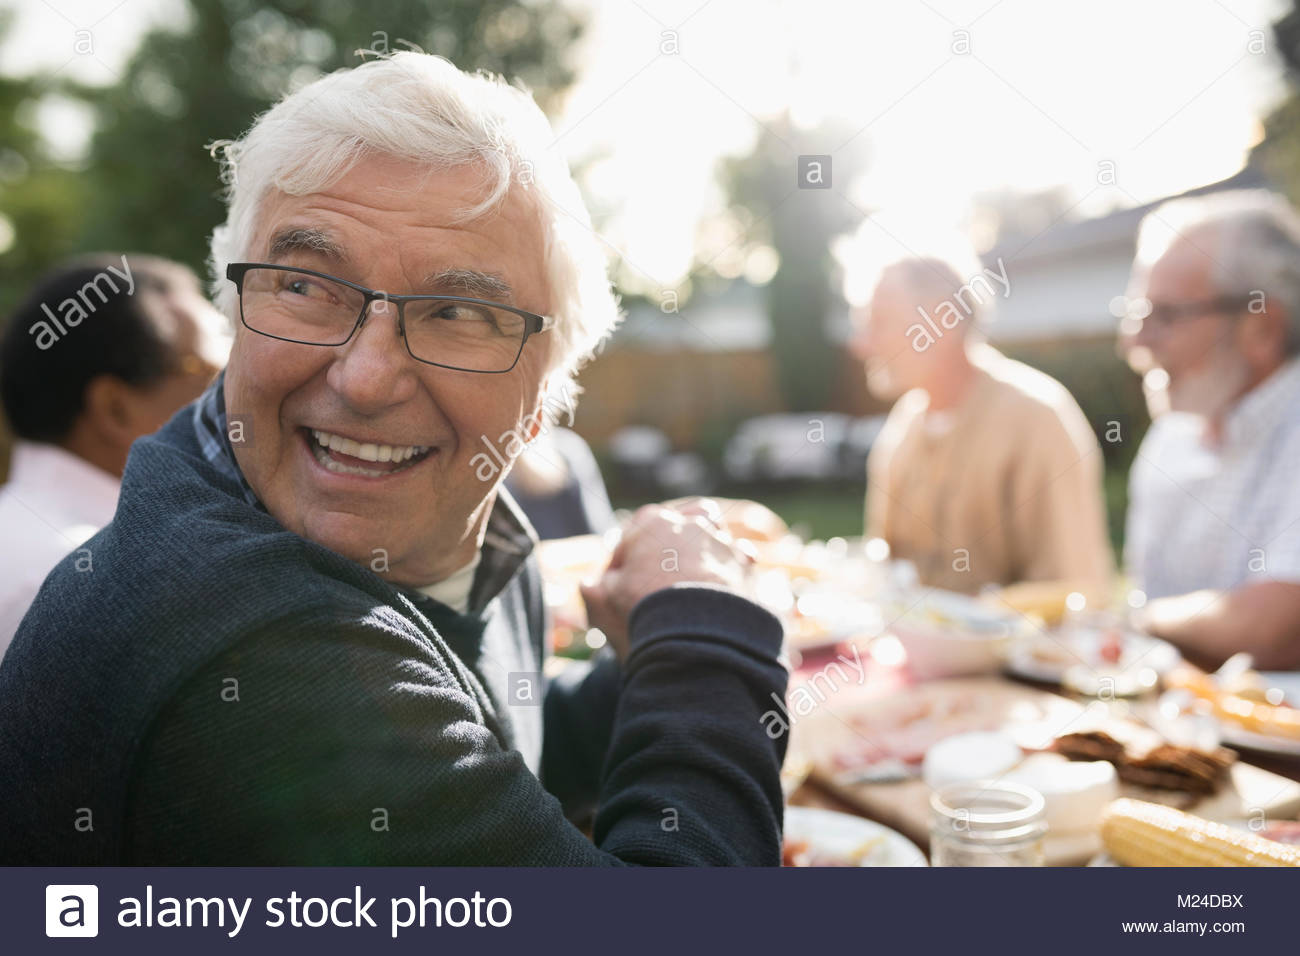 Smiling senior man looking over shoulder, enjoying garden party lunch at sunny patio table Stock Photo